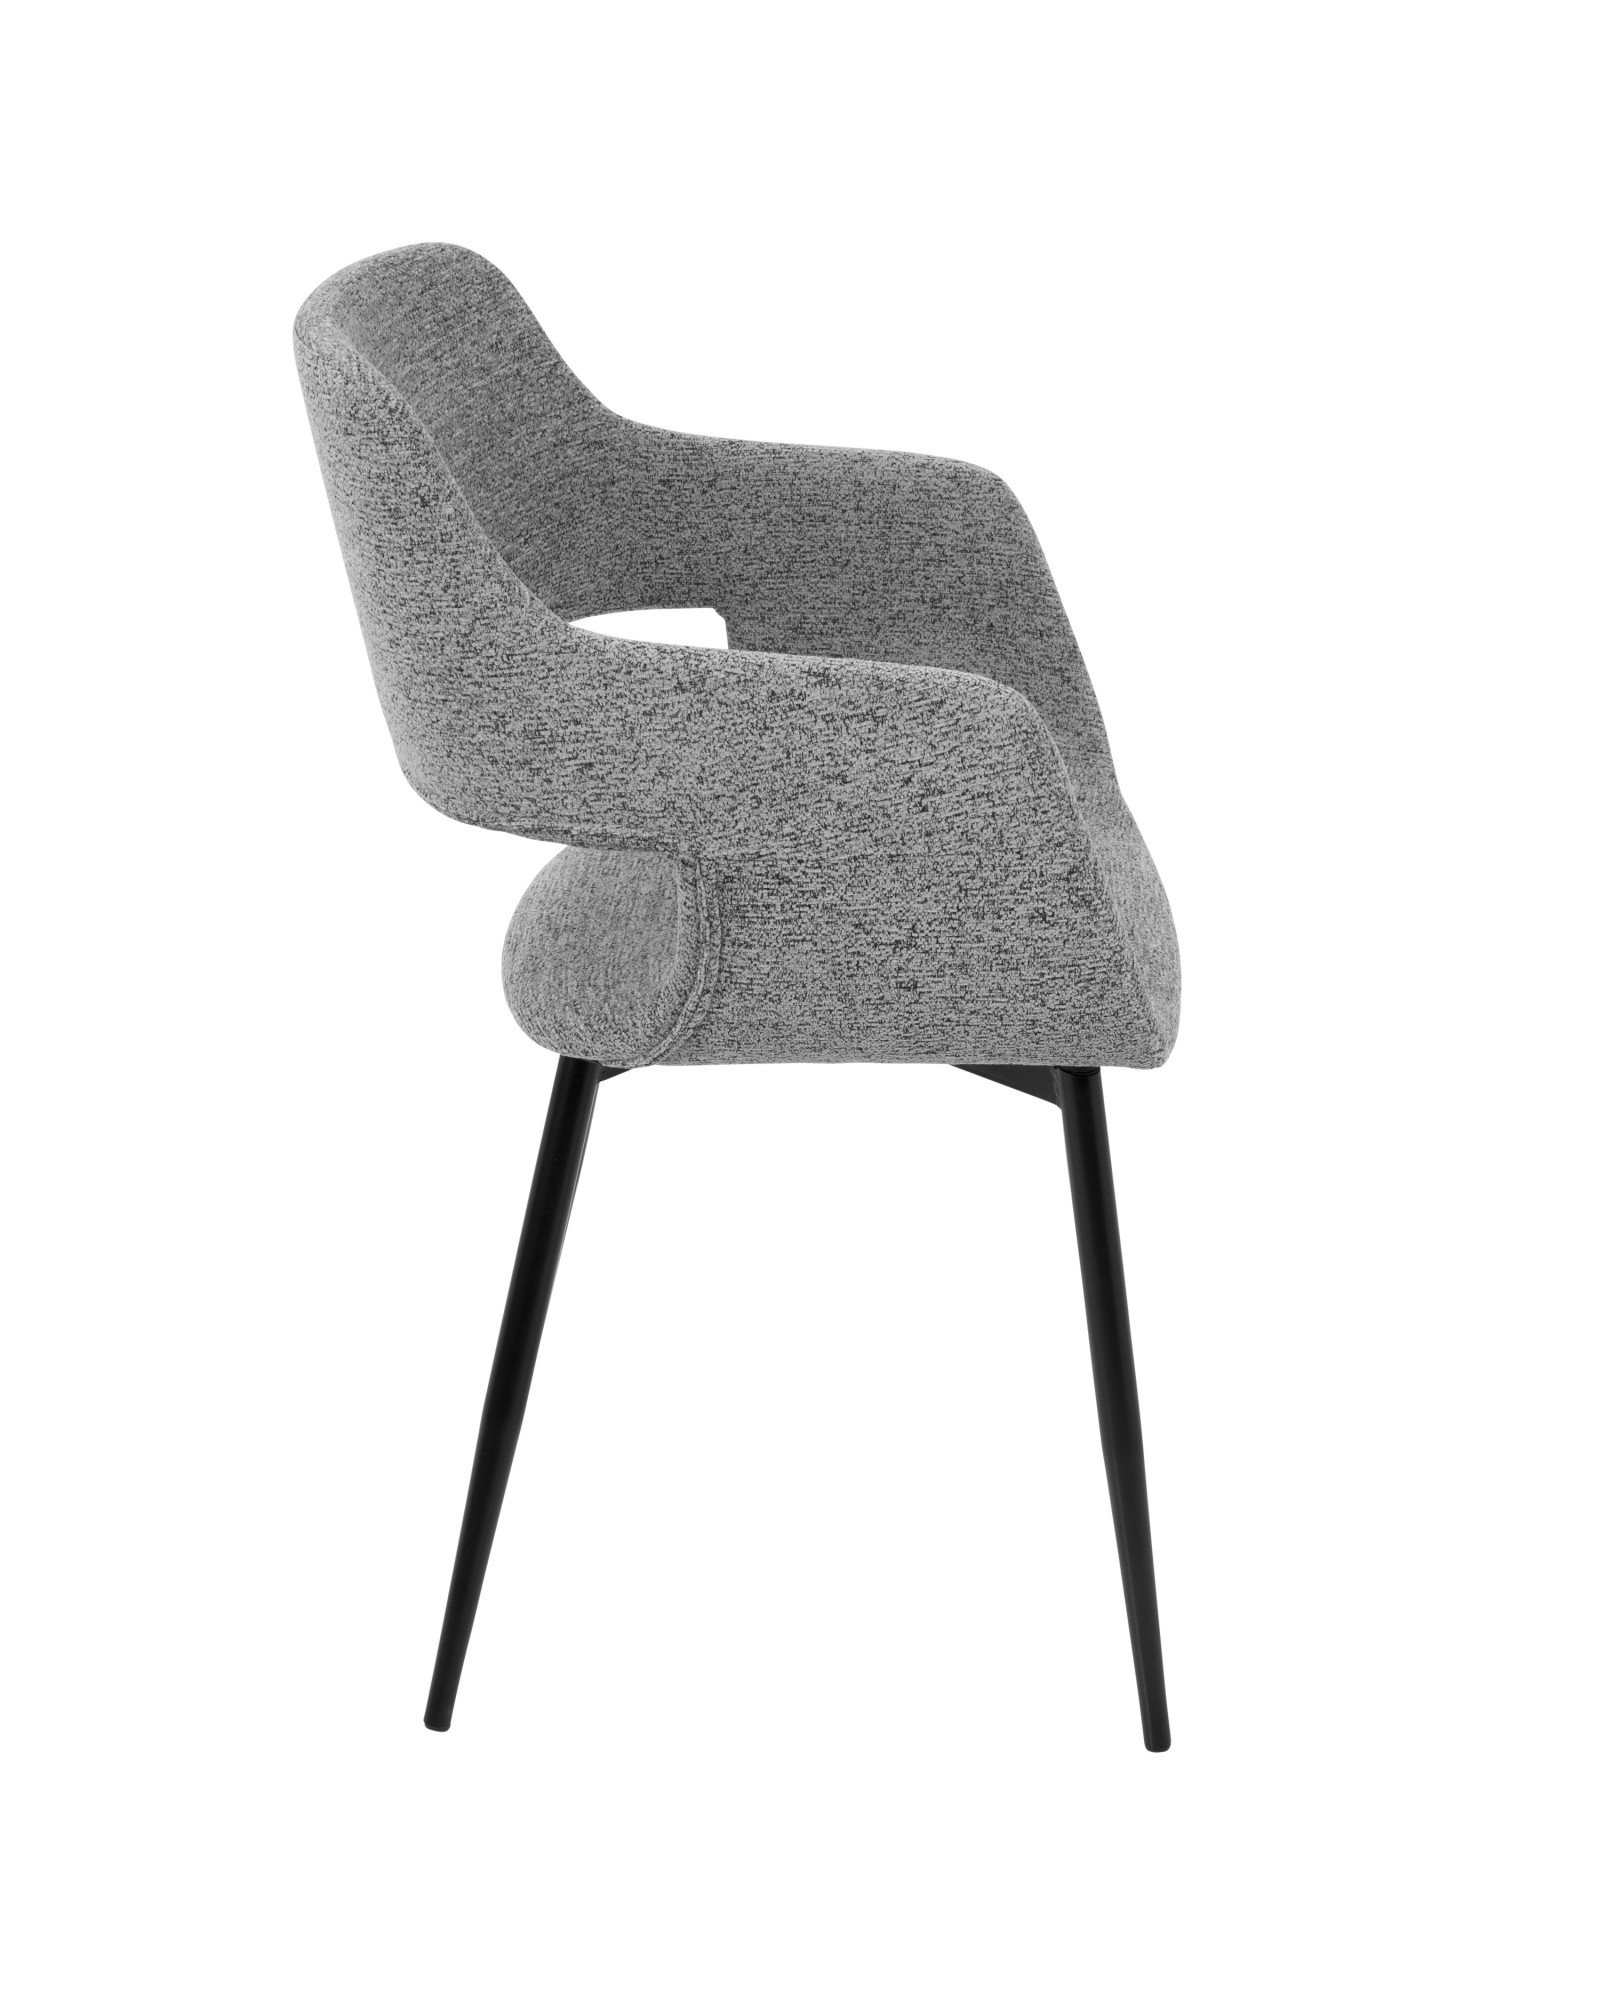 Margarite Mid-Century Modern Dining/Accent Chair in Black with Grey Fabric - Set of 2